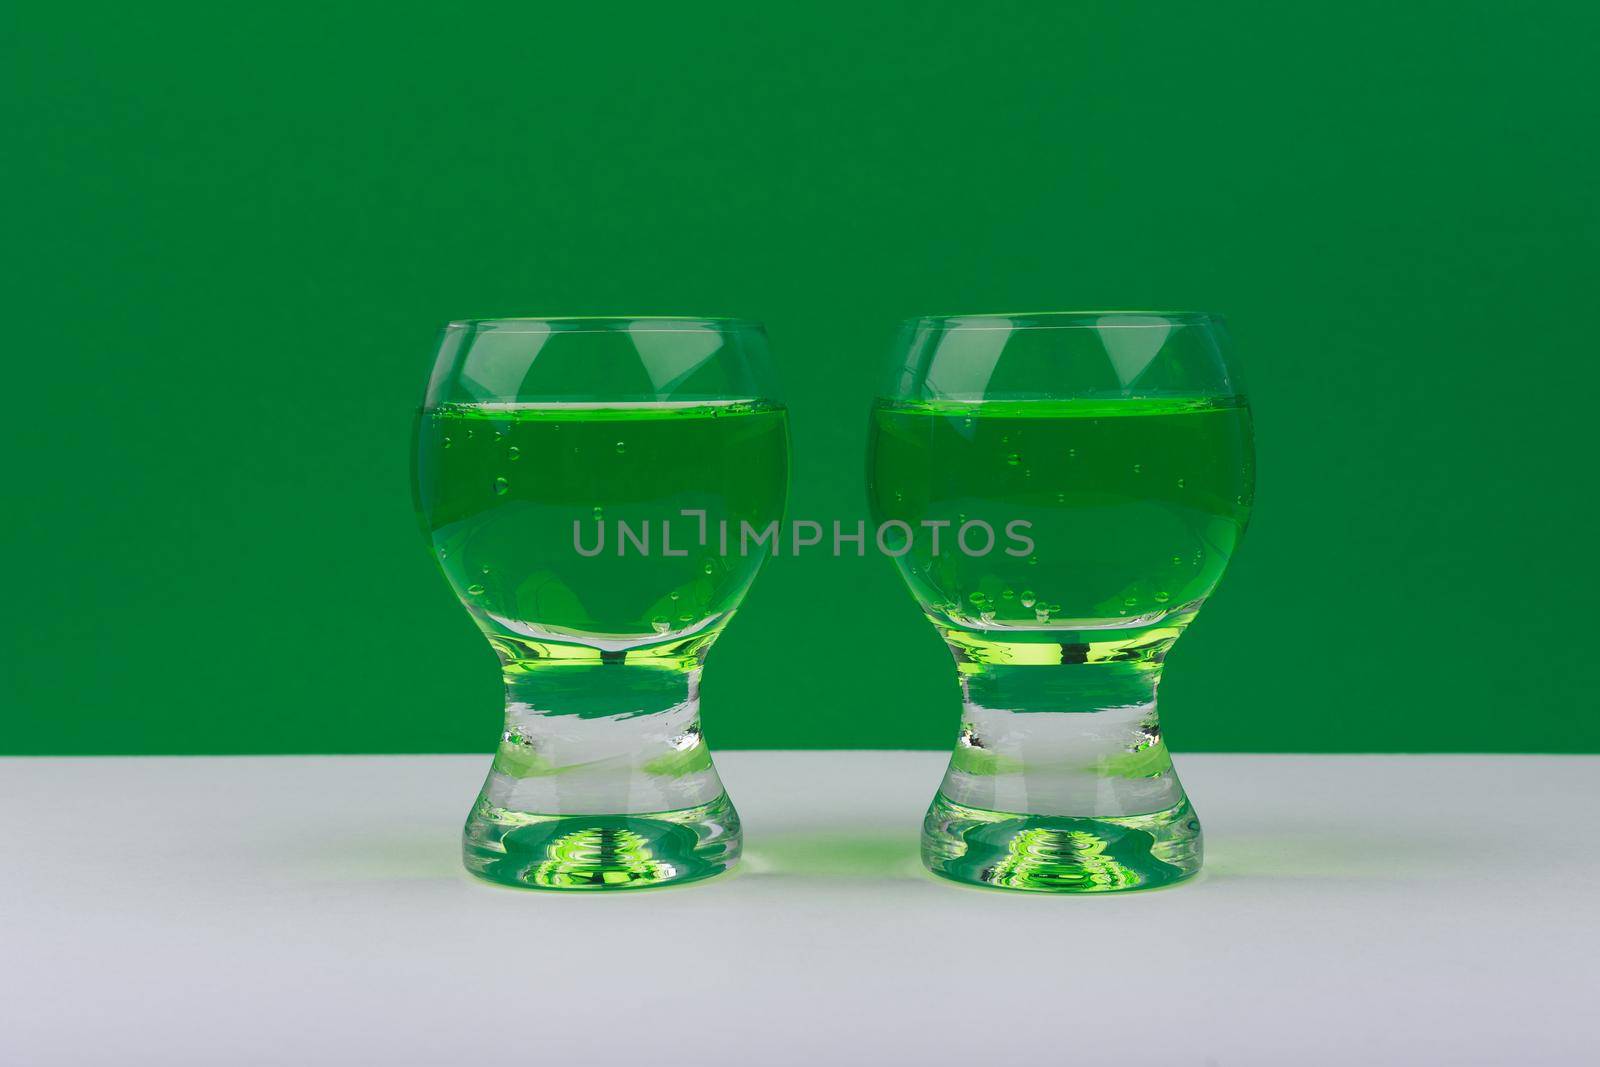 Two glass shots with green drinks on white table against green background by Senorina_Irina